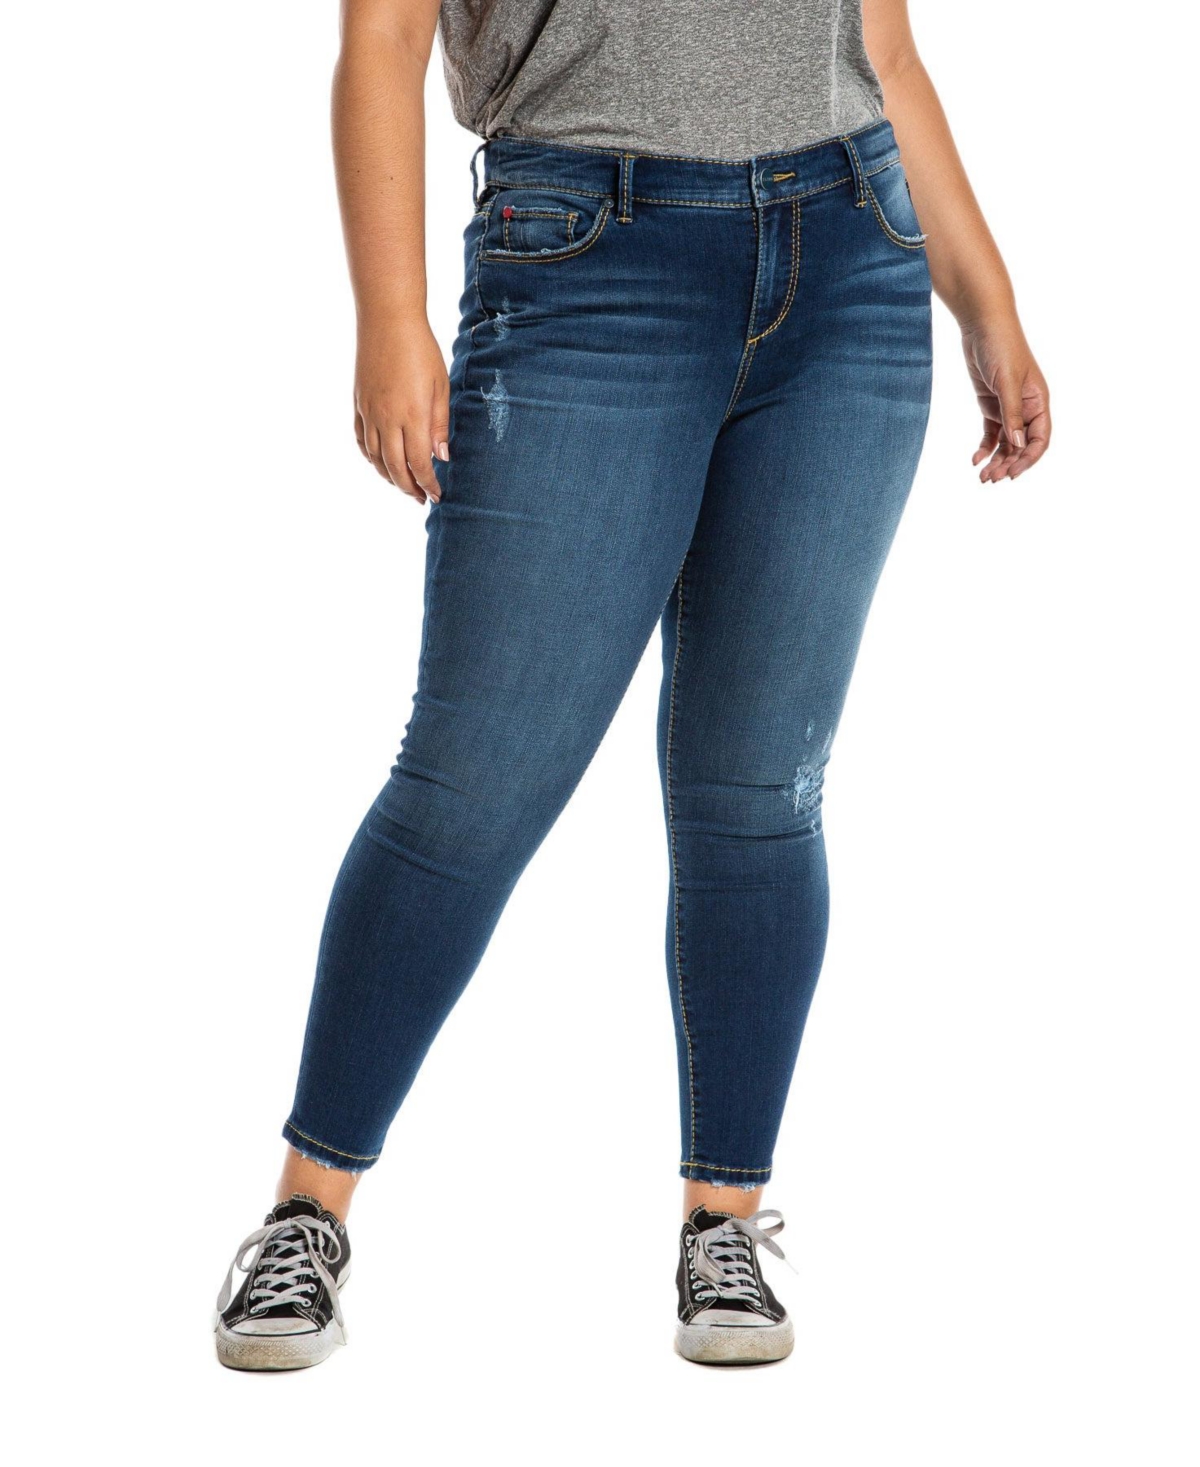 Plus Size Mid Rise Skinny Jeans - Beatrice